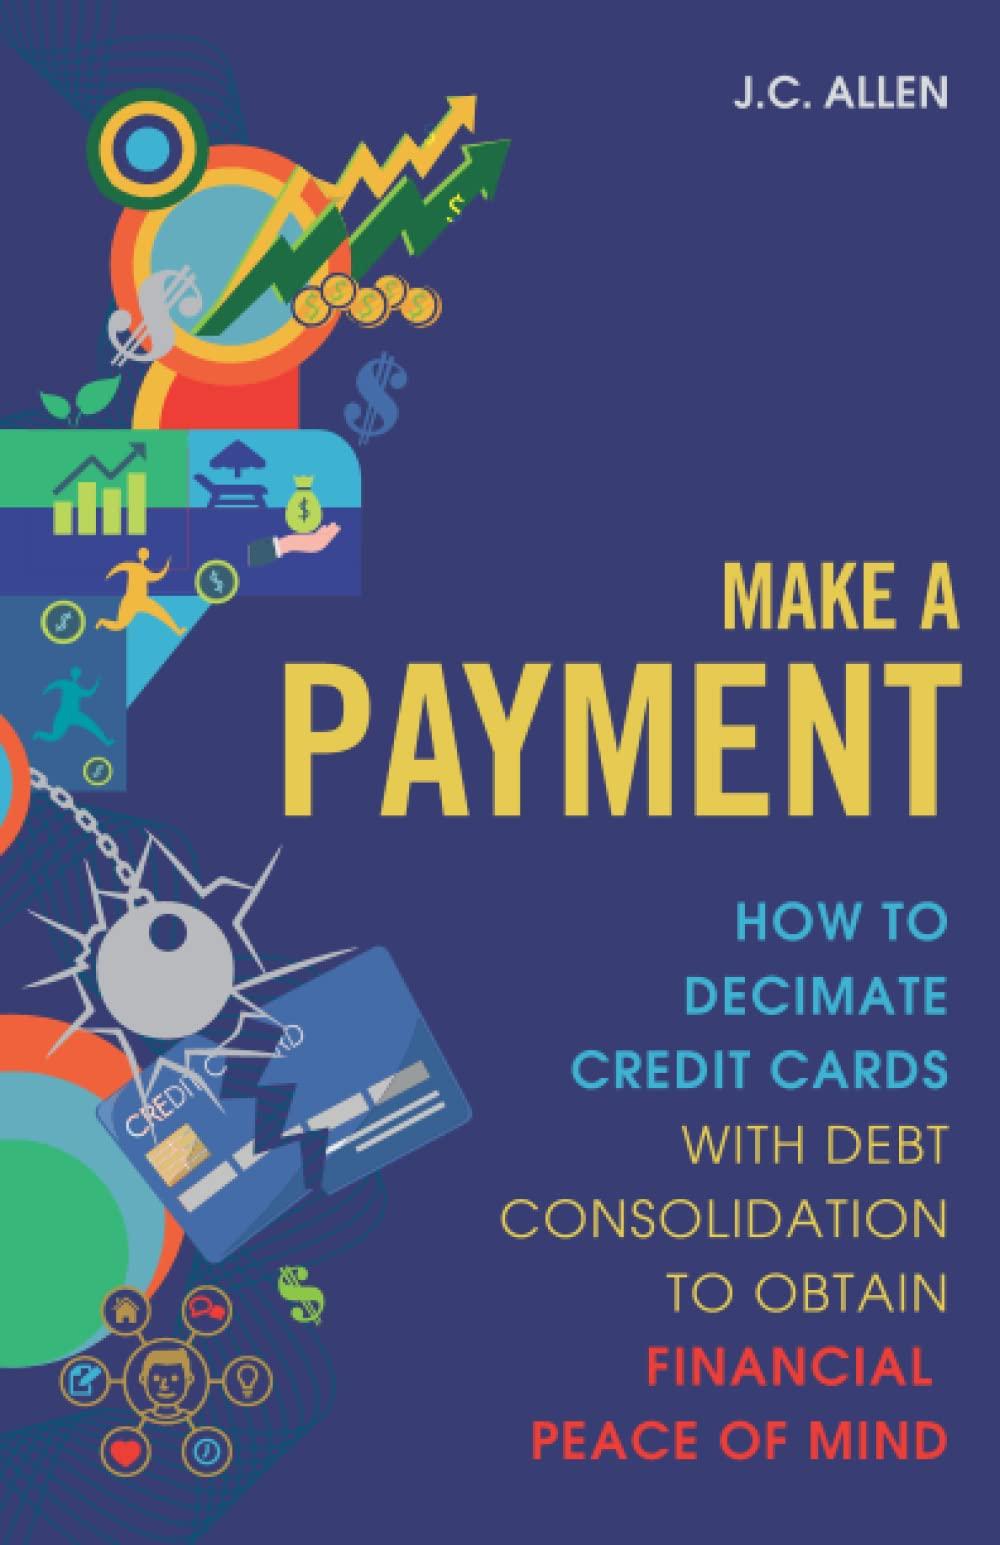 Make A Payment How To Decimate Credit Cards With Debt Consolidation To Obtain Financial Peace Of Mind